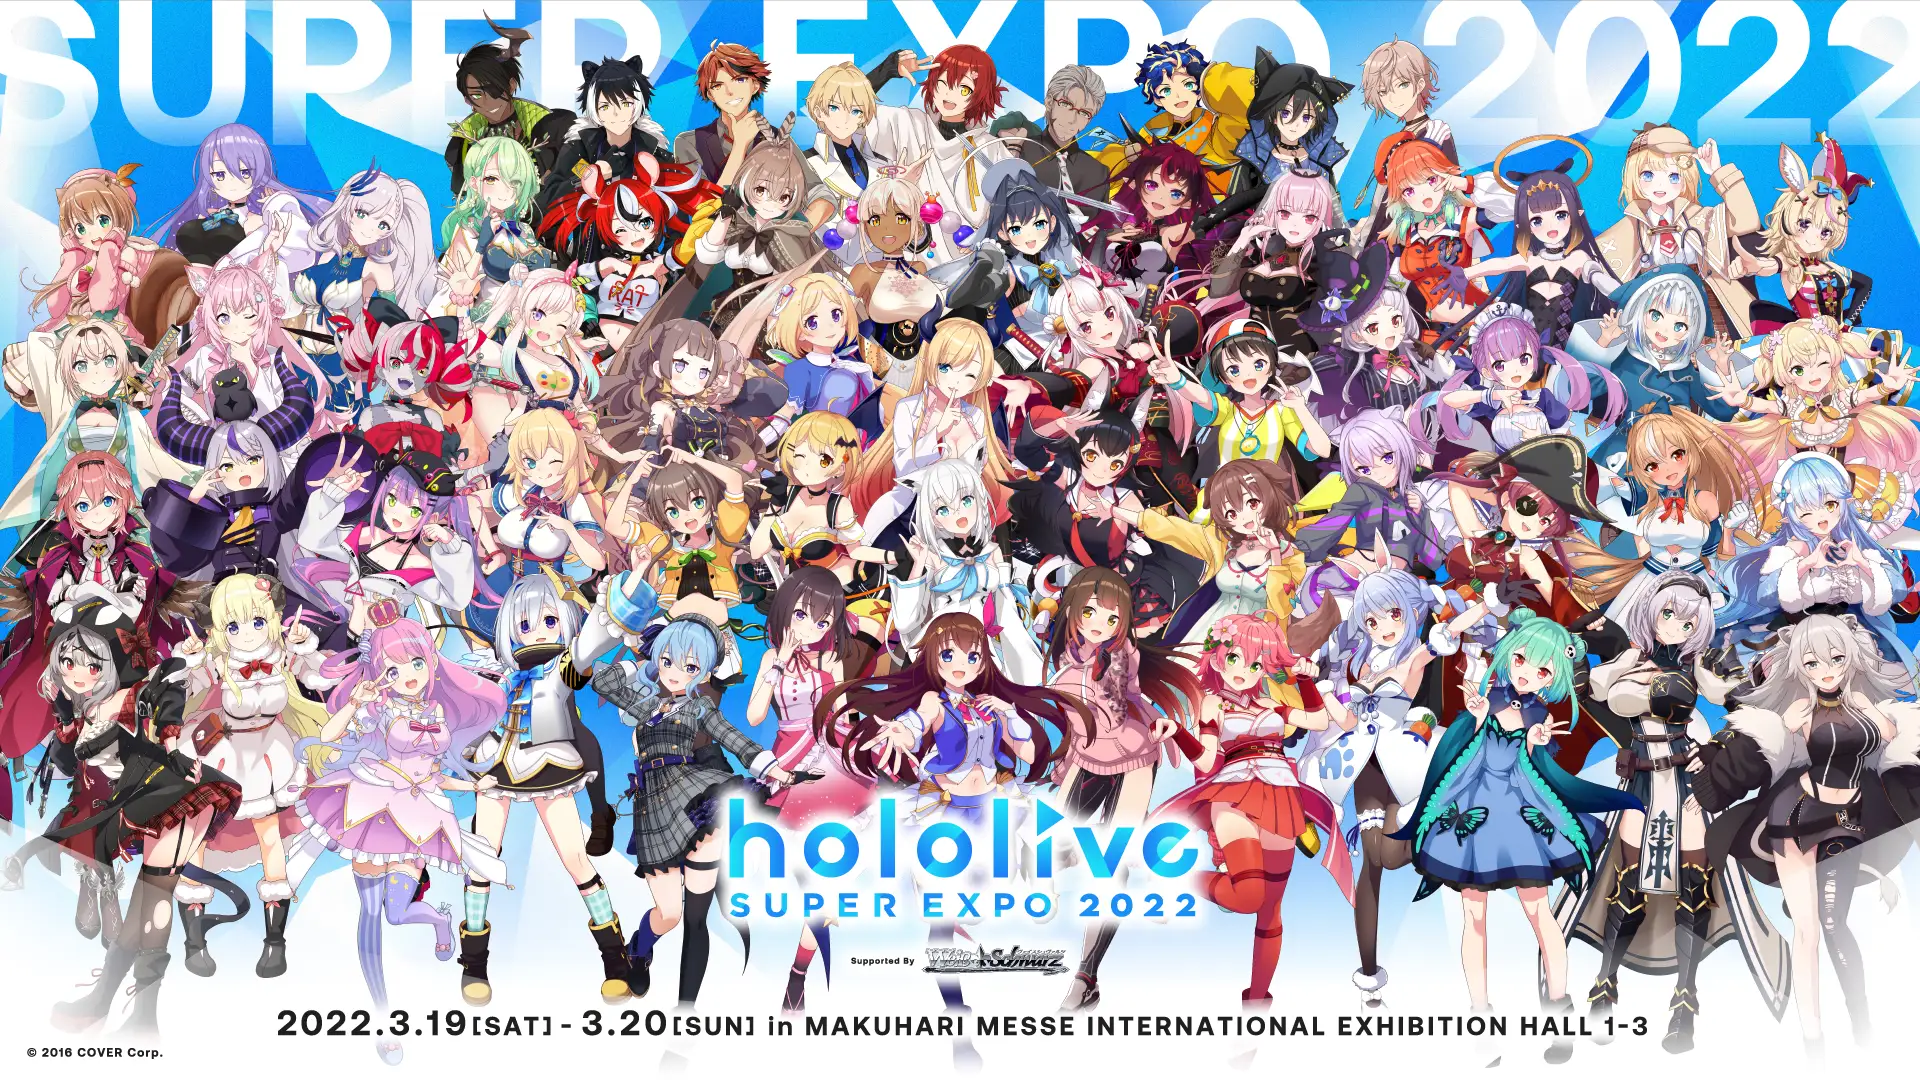 hololive SUPER EXPO 2022」・「hololive 3rd fes. Link Your Wish 